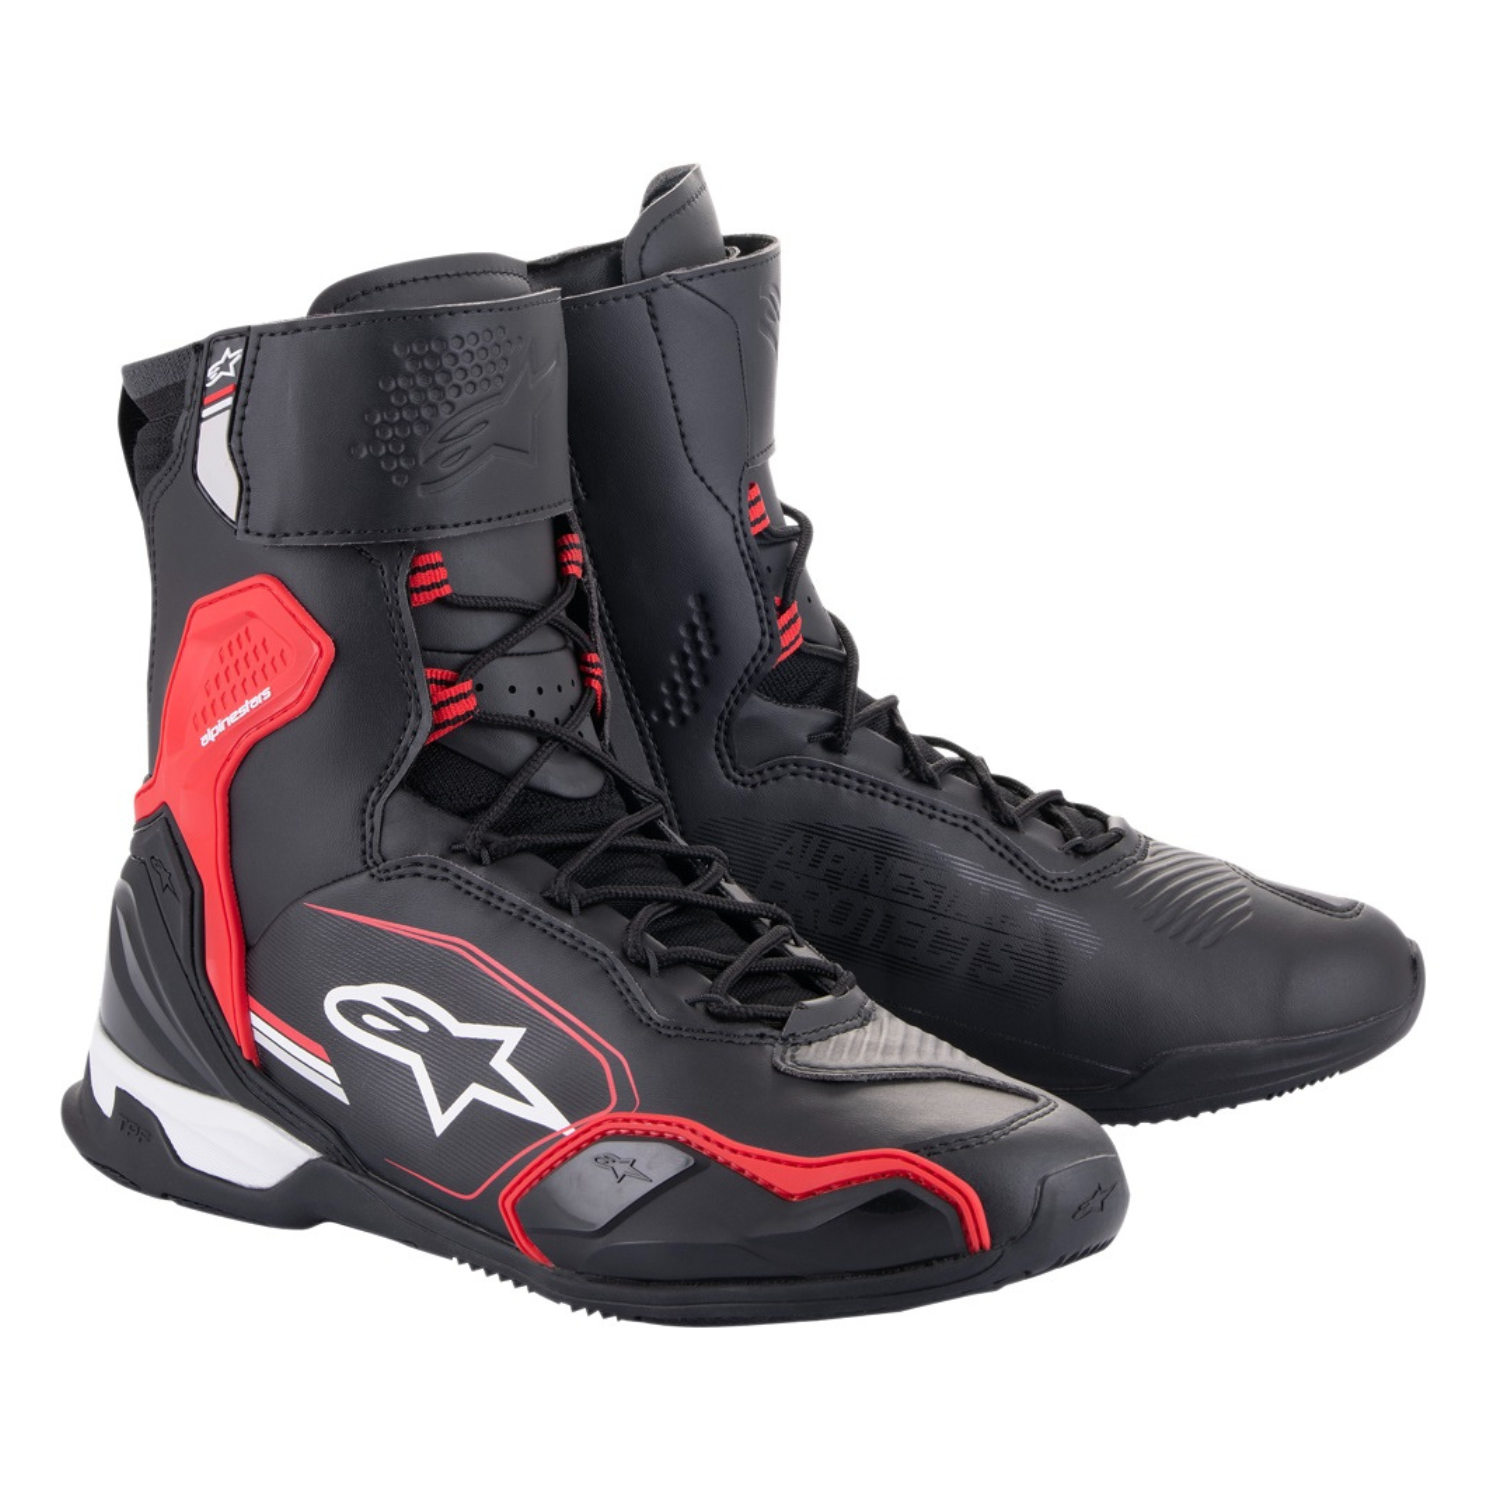 Image of Alpinestars Superfaster Shoes Black Bright Red White Taille US 135